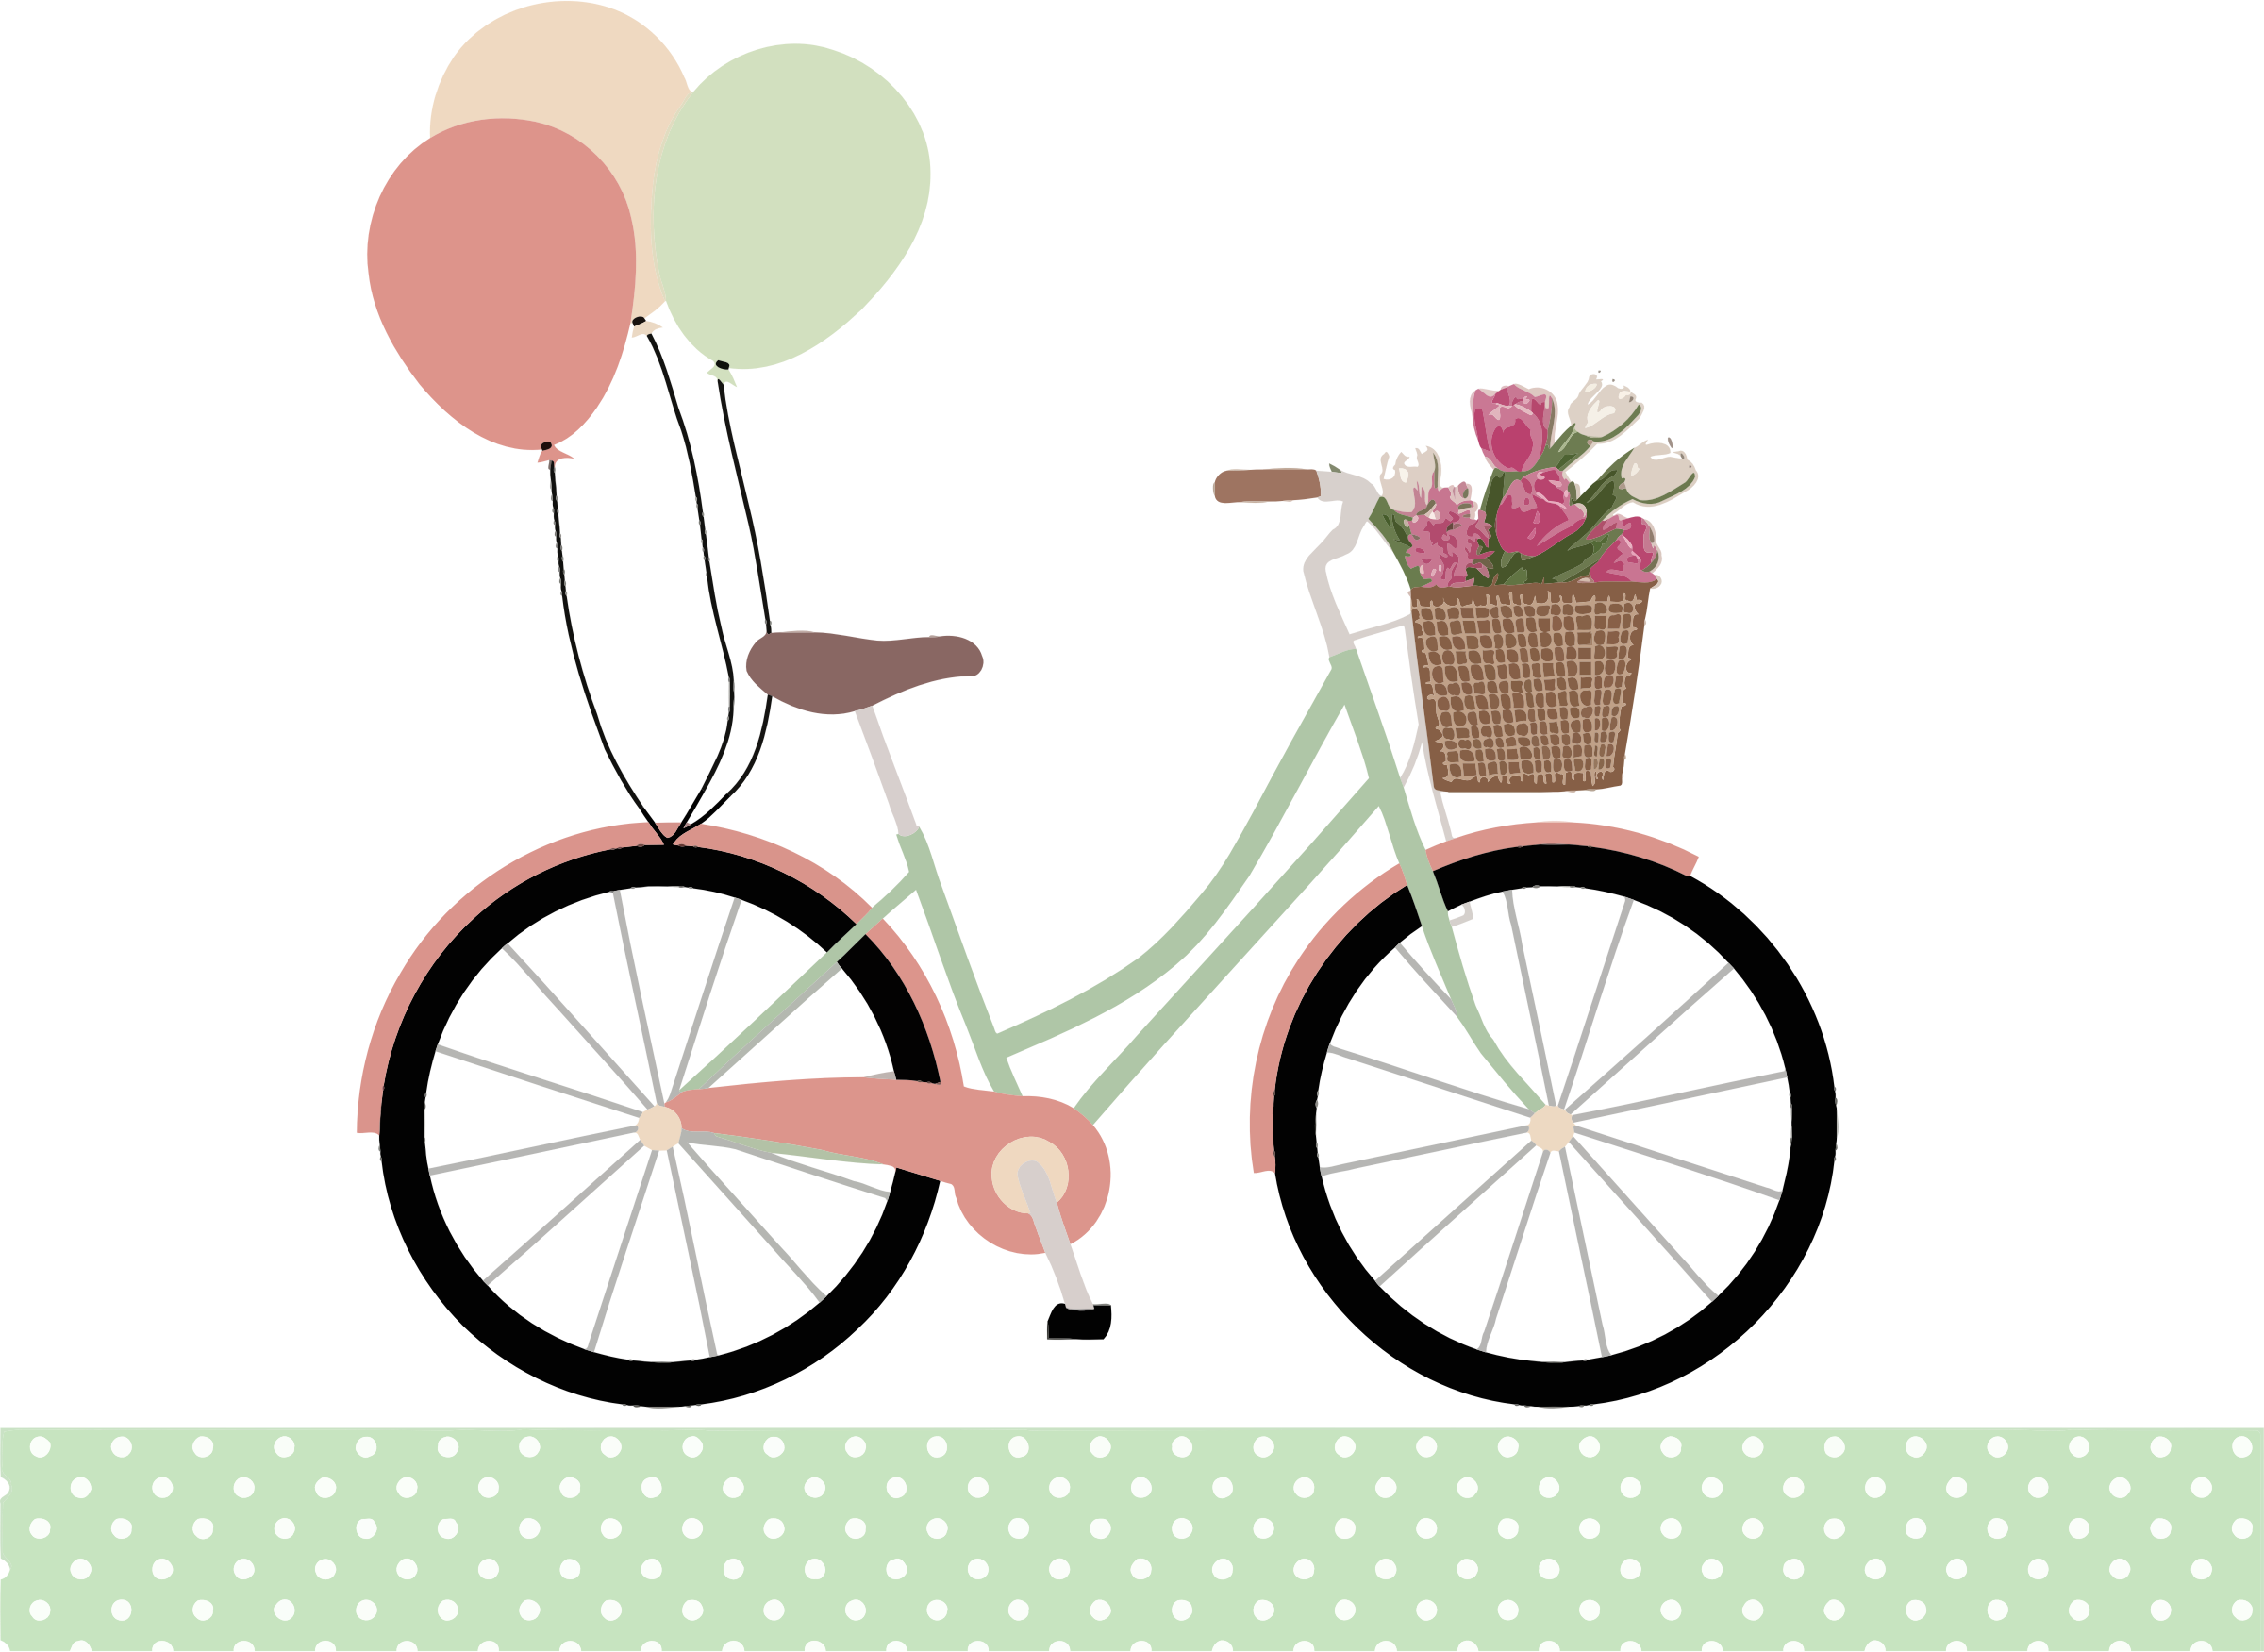 Bicycle With Balloons by GDJ | Cards -Wedding/Anniversary/Shower ...